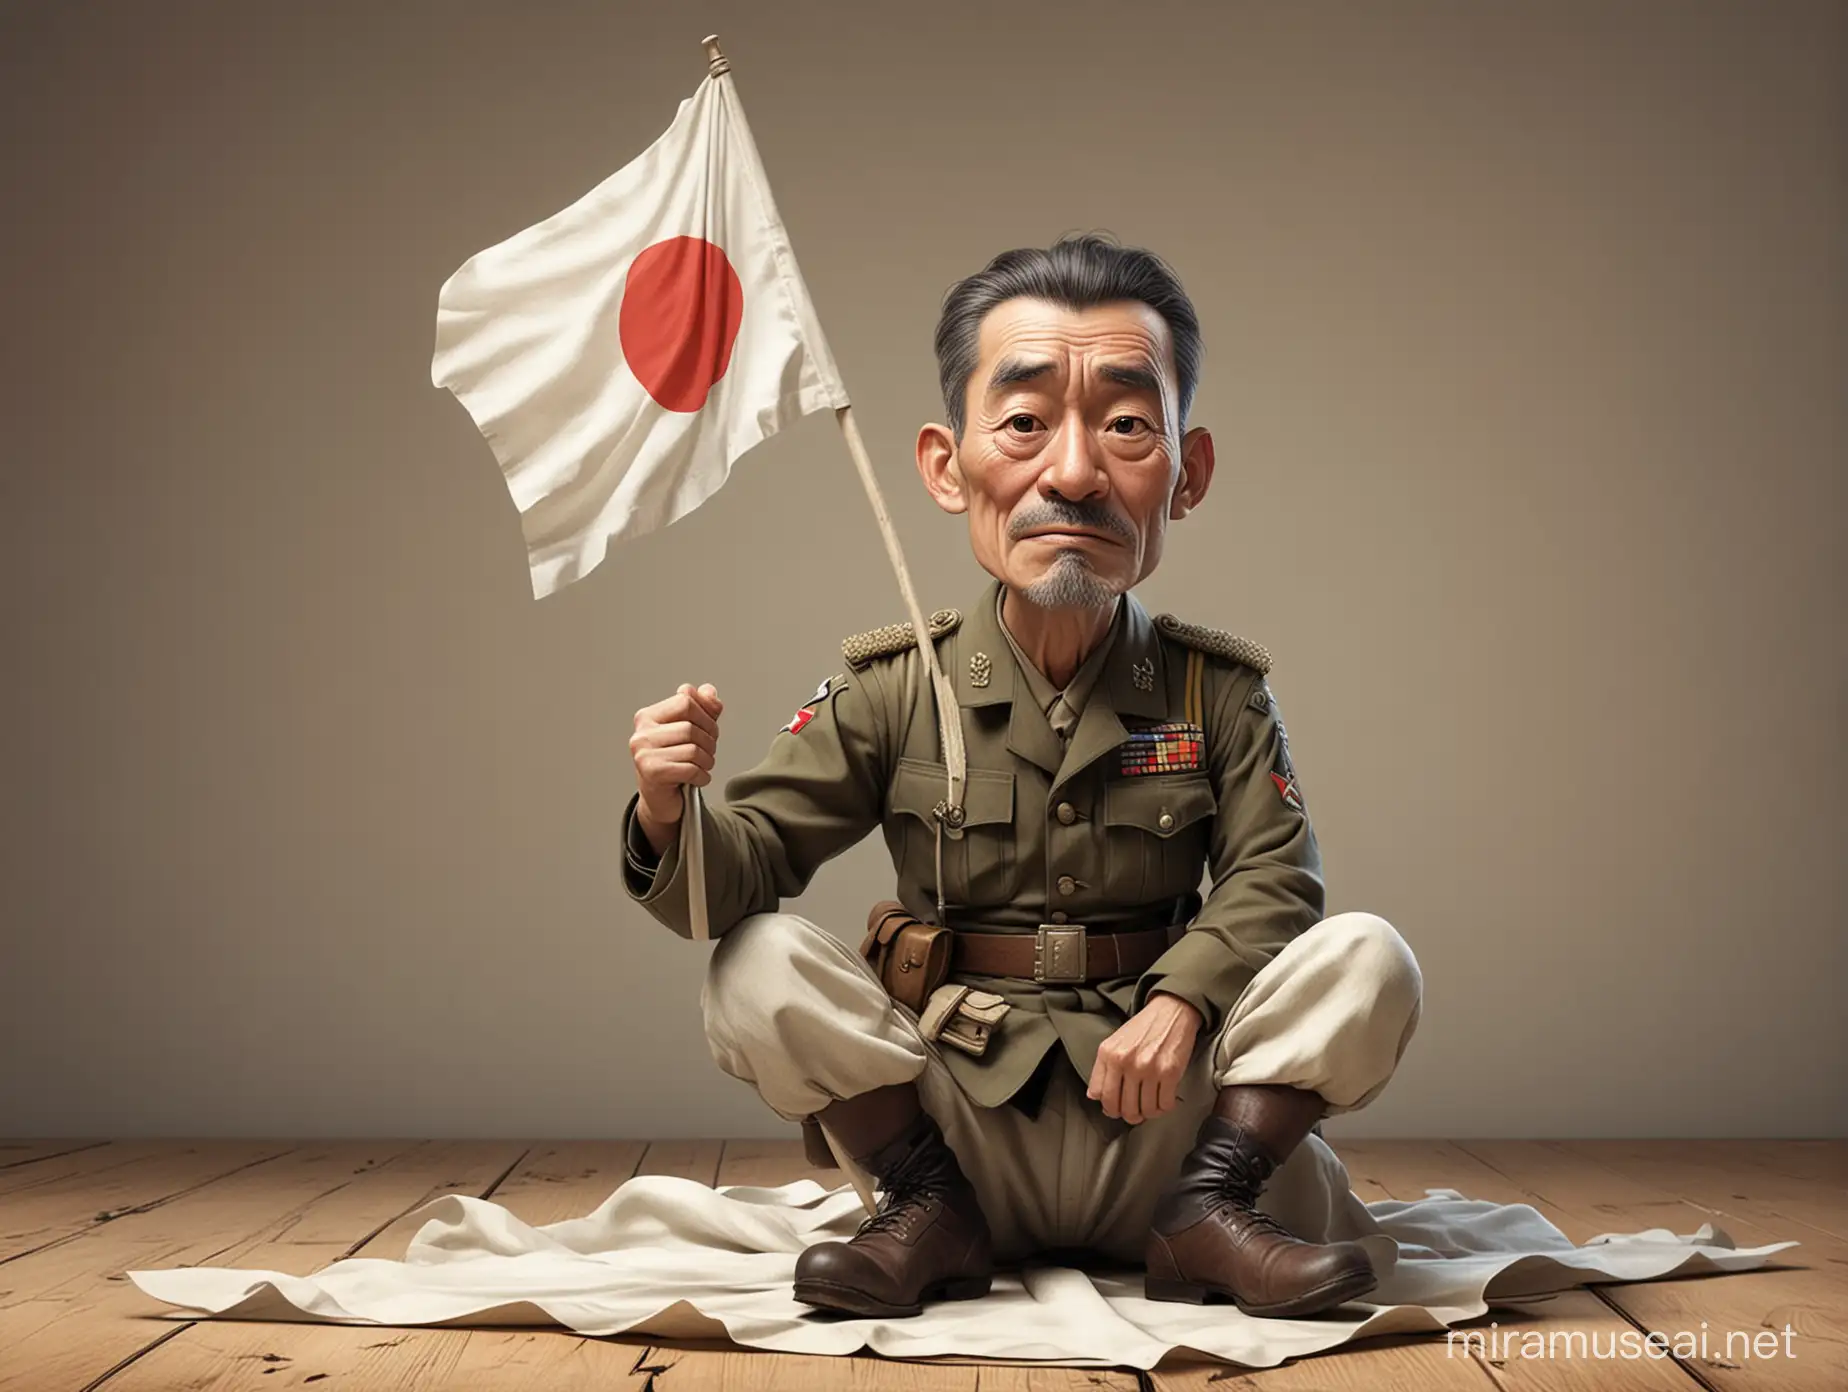 caricature of a ww2 japanese general soldier, sad facial expression ,sitting on the floor, holding white flag, waving white flag, pixar style